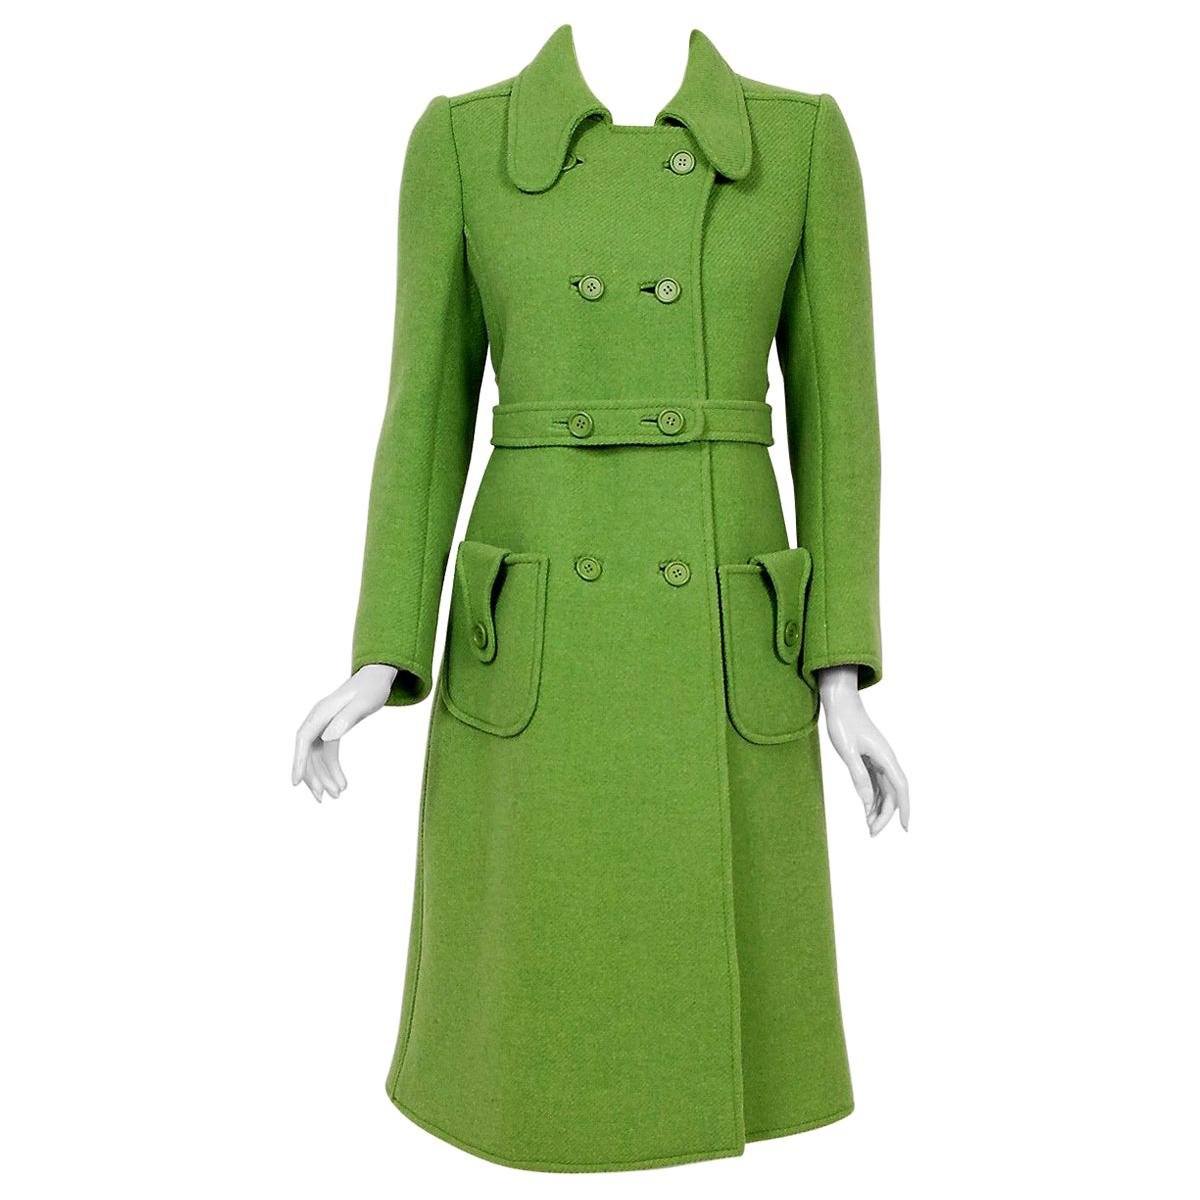 Vintage 1969 Courreges Couture Green Wool Double-Breasted Mod Belted Coat 